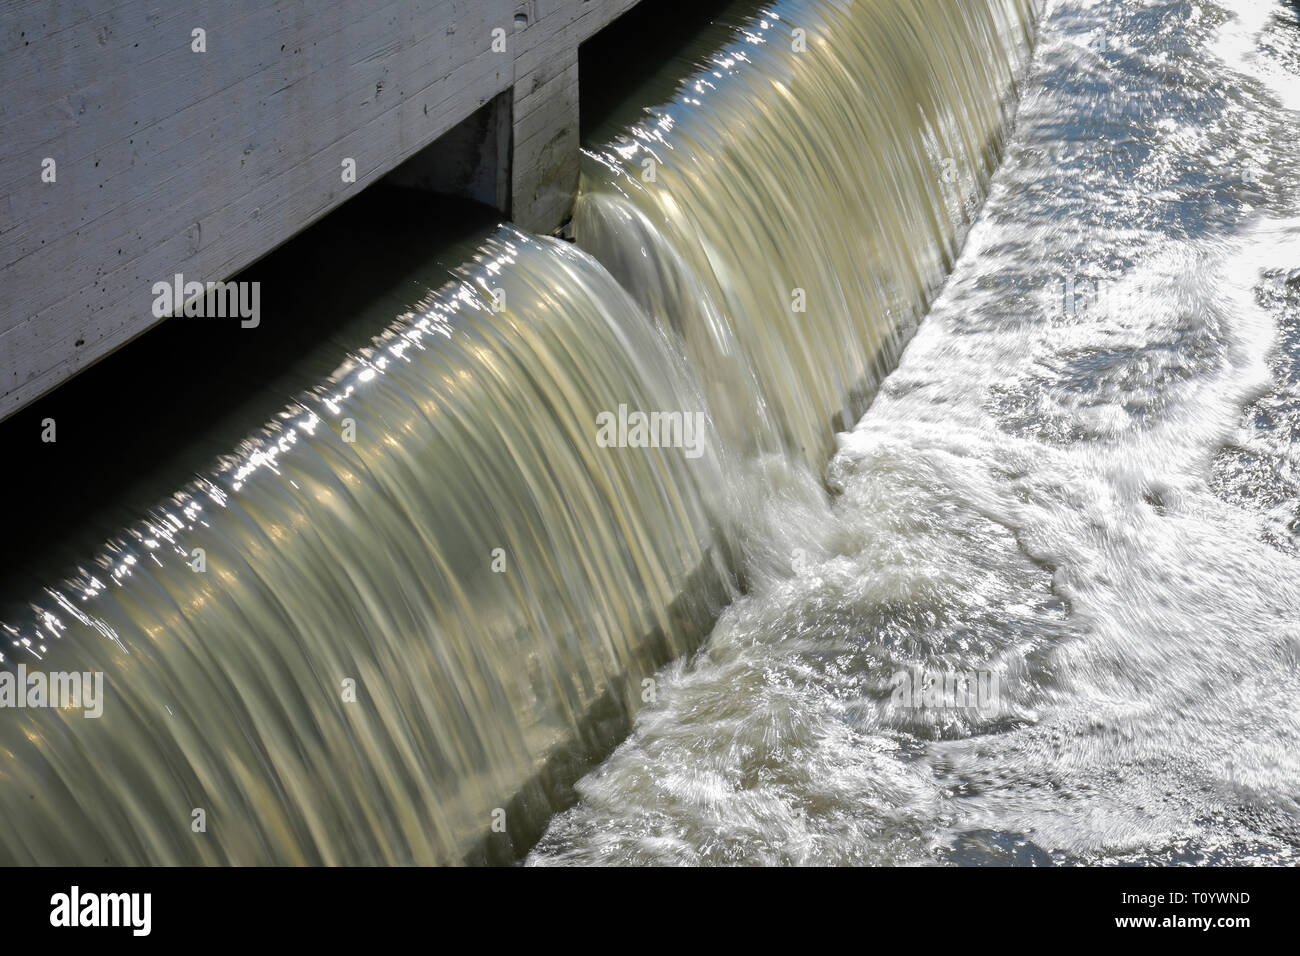 Germany - Waste water treatment, here in the preliminary clarifier basin of a sewage treatment plant the waste water is mechanically treated. Modern s Stock Photo